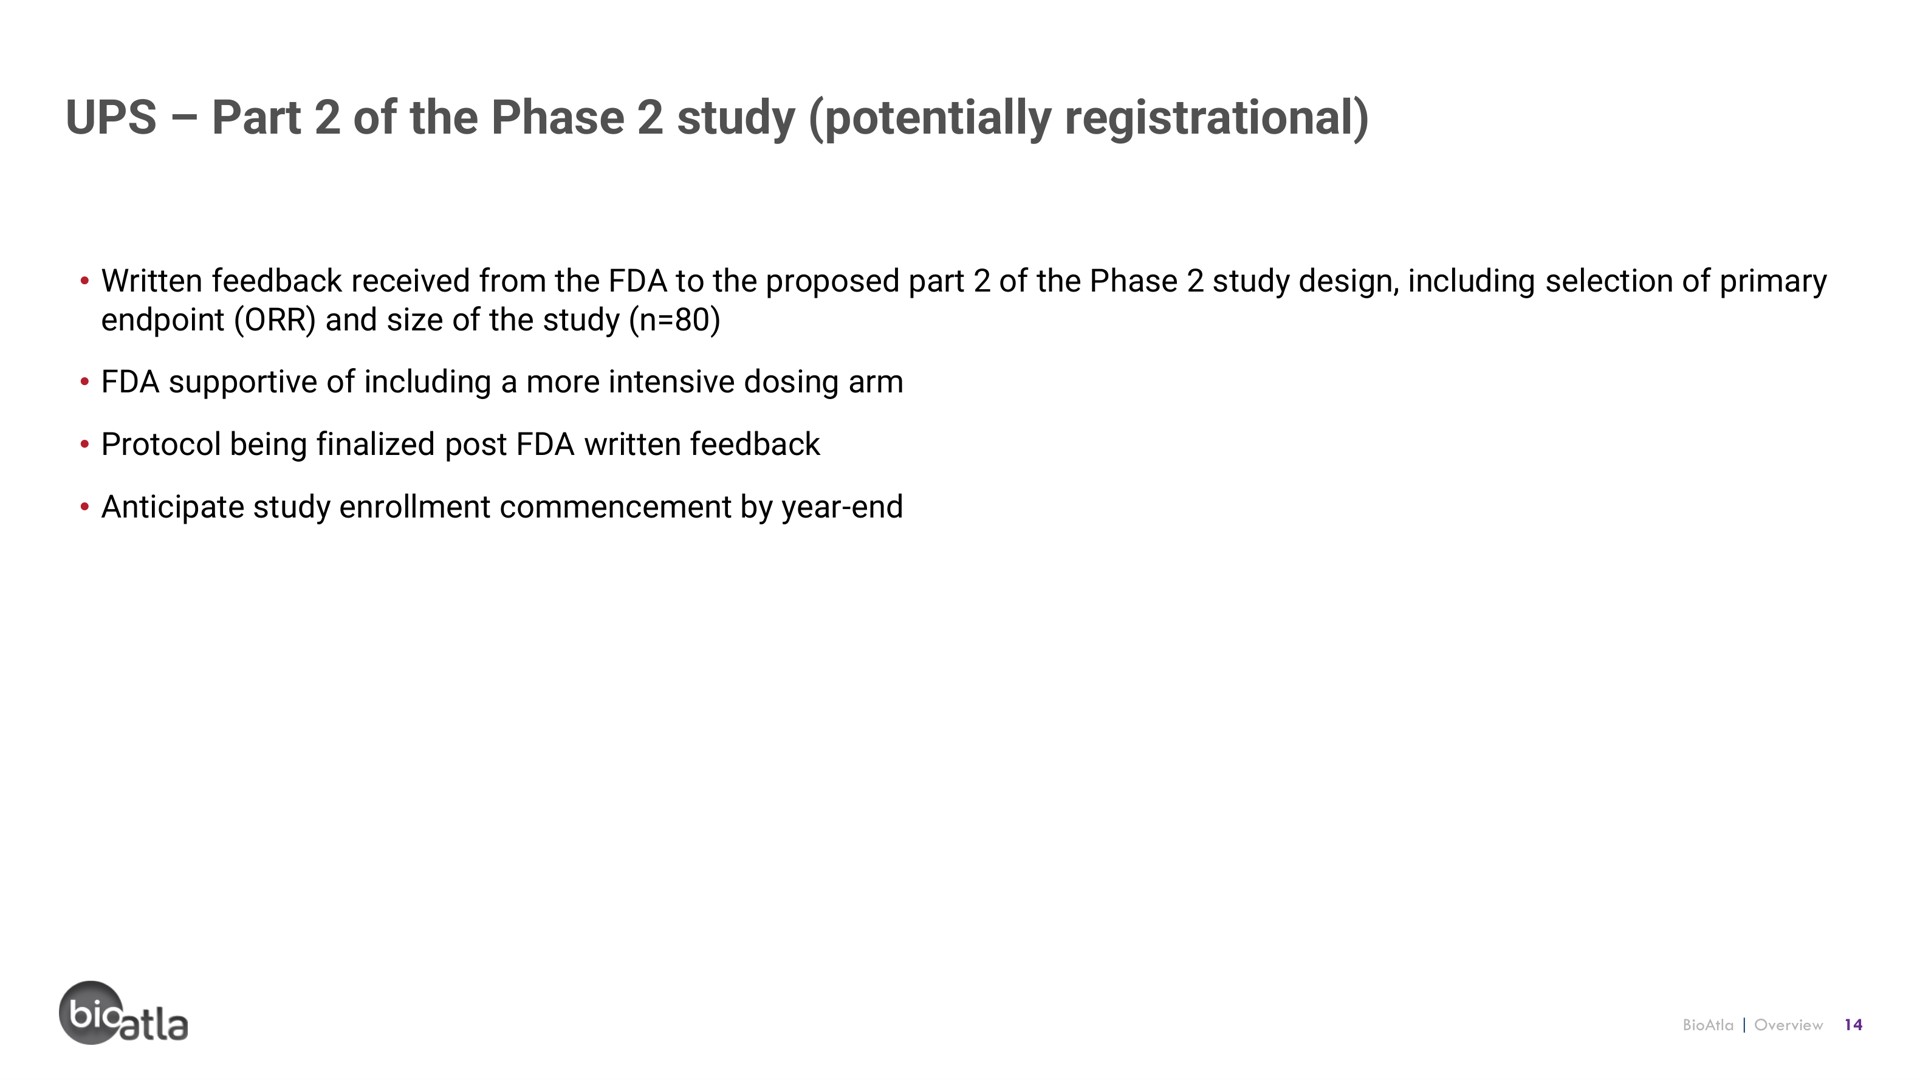 ups part of the phase study potentially registrational | BioAtla